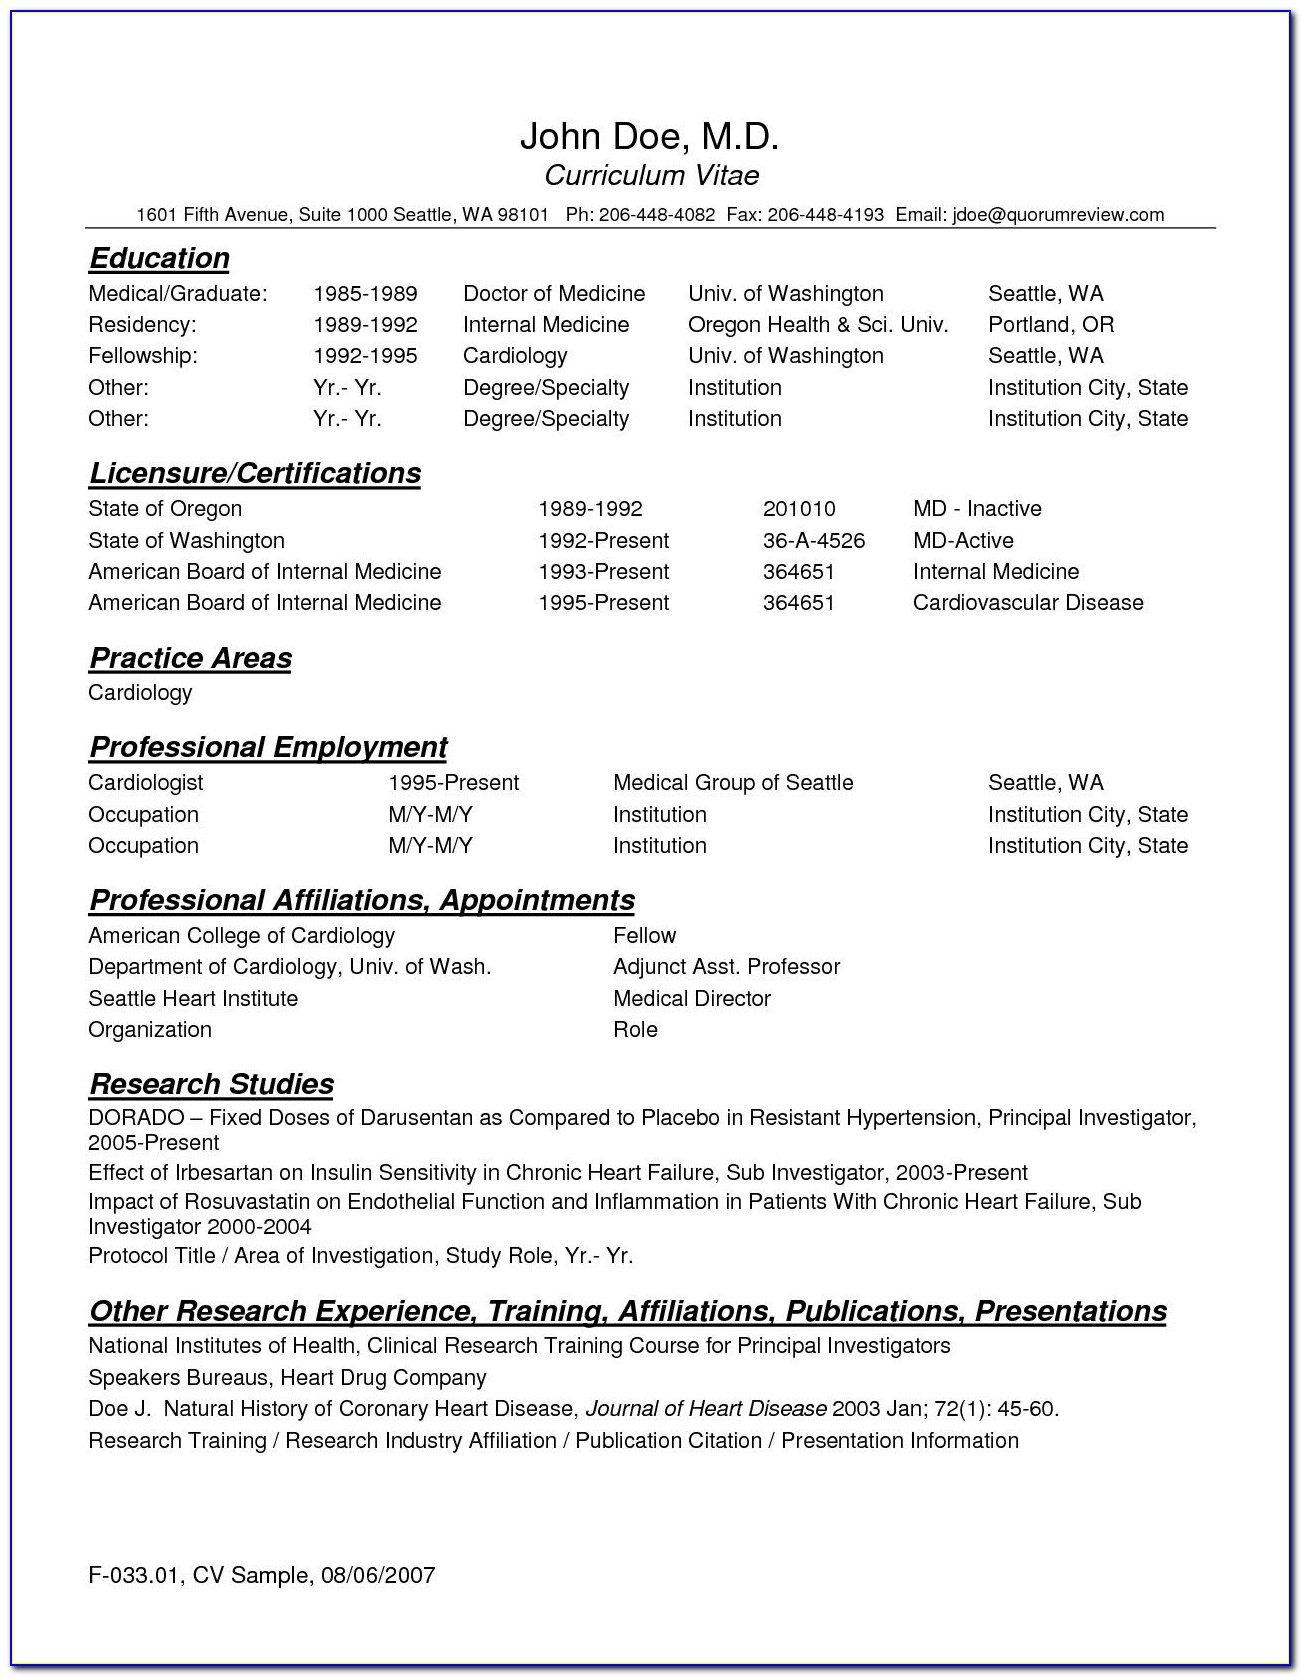 Curriculum Vitae Sample For Physician Assistant